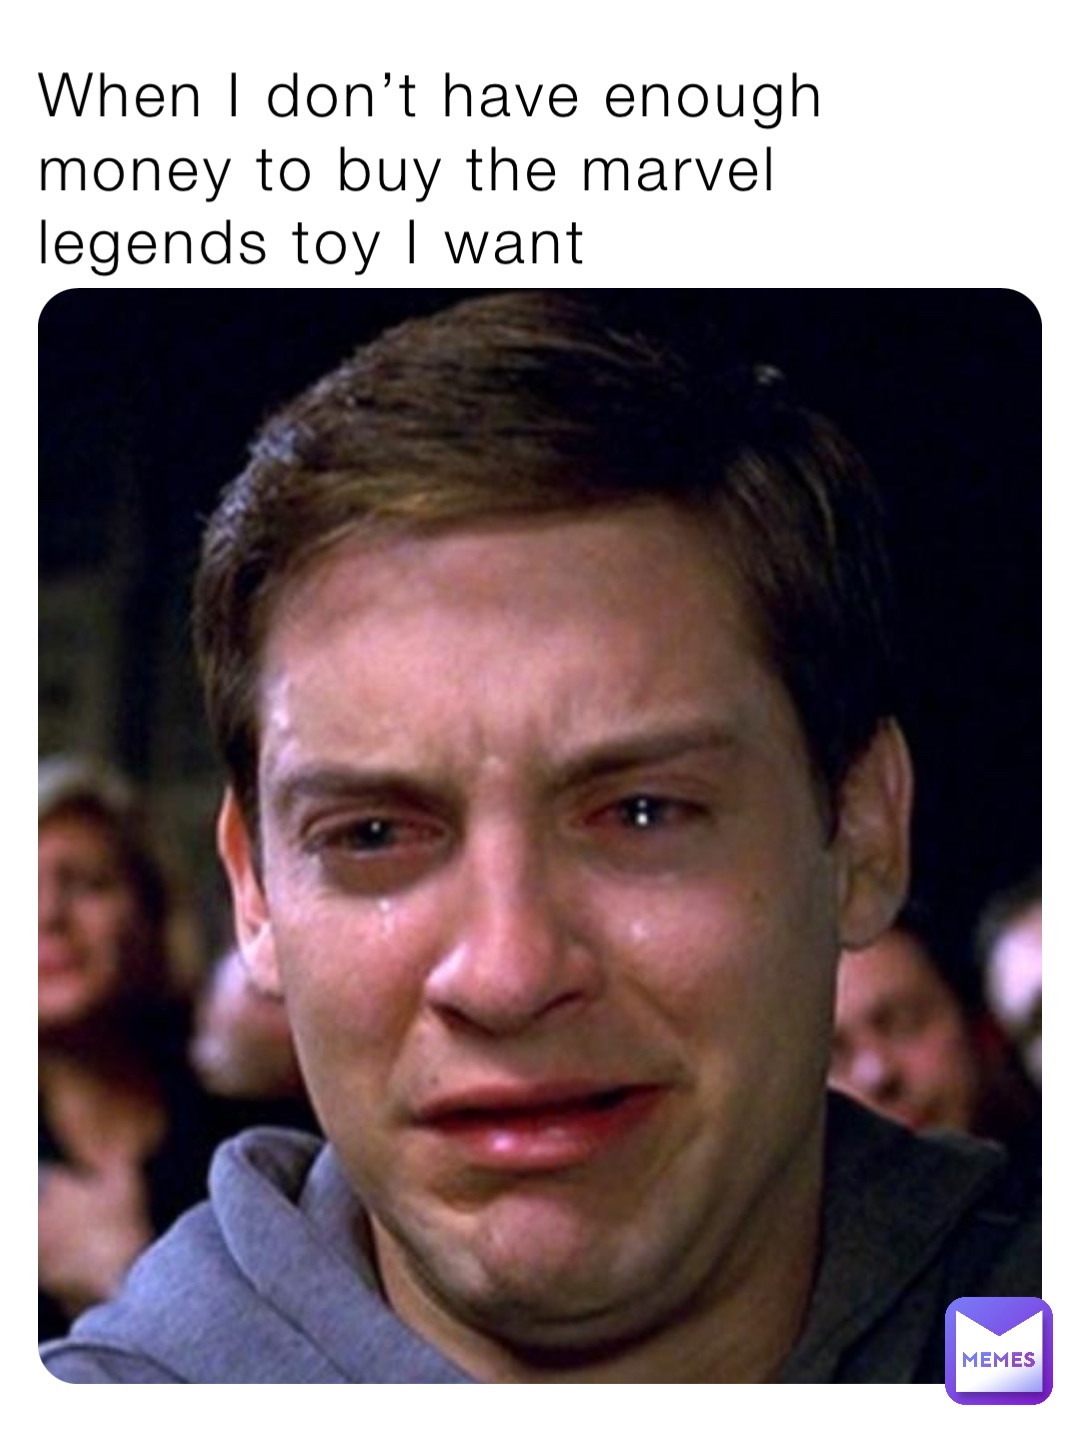 When I don’t have enough money to buy the marvel legends toy I want